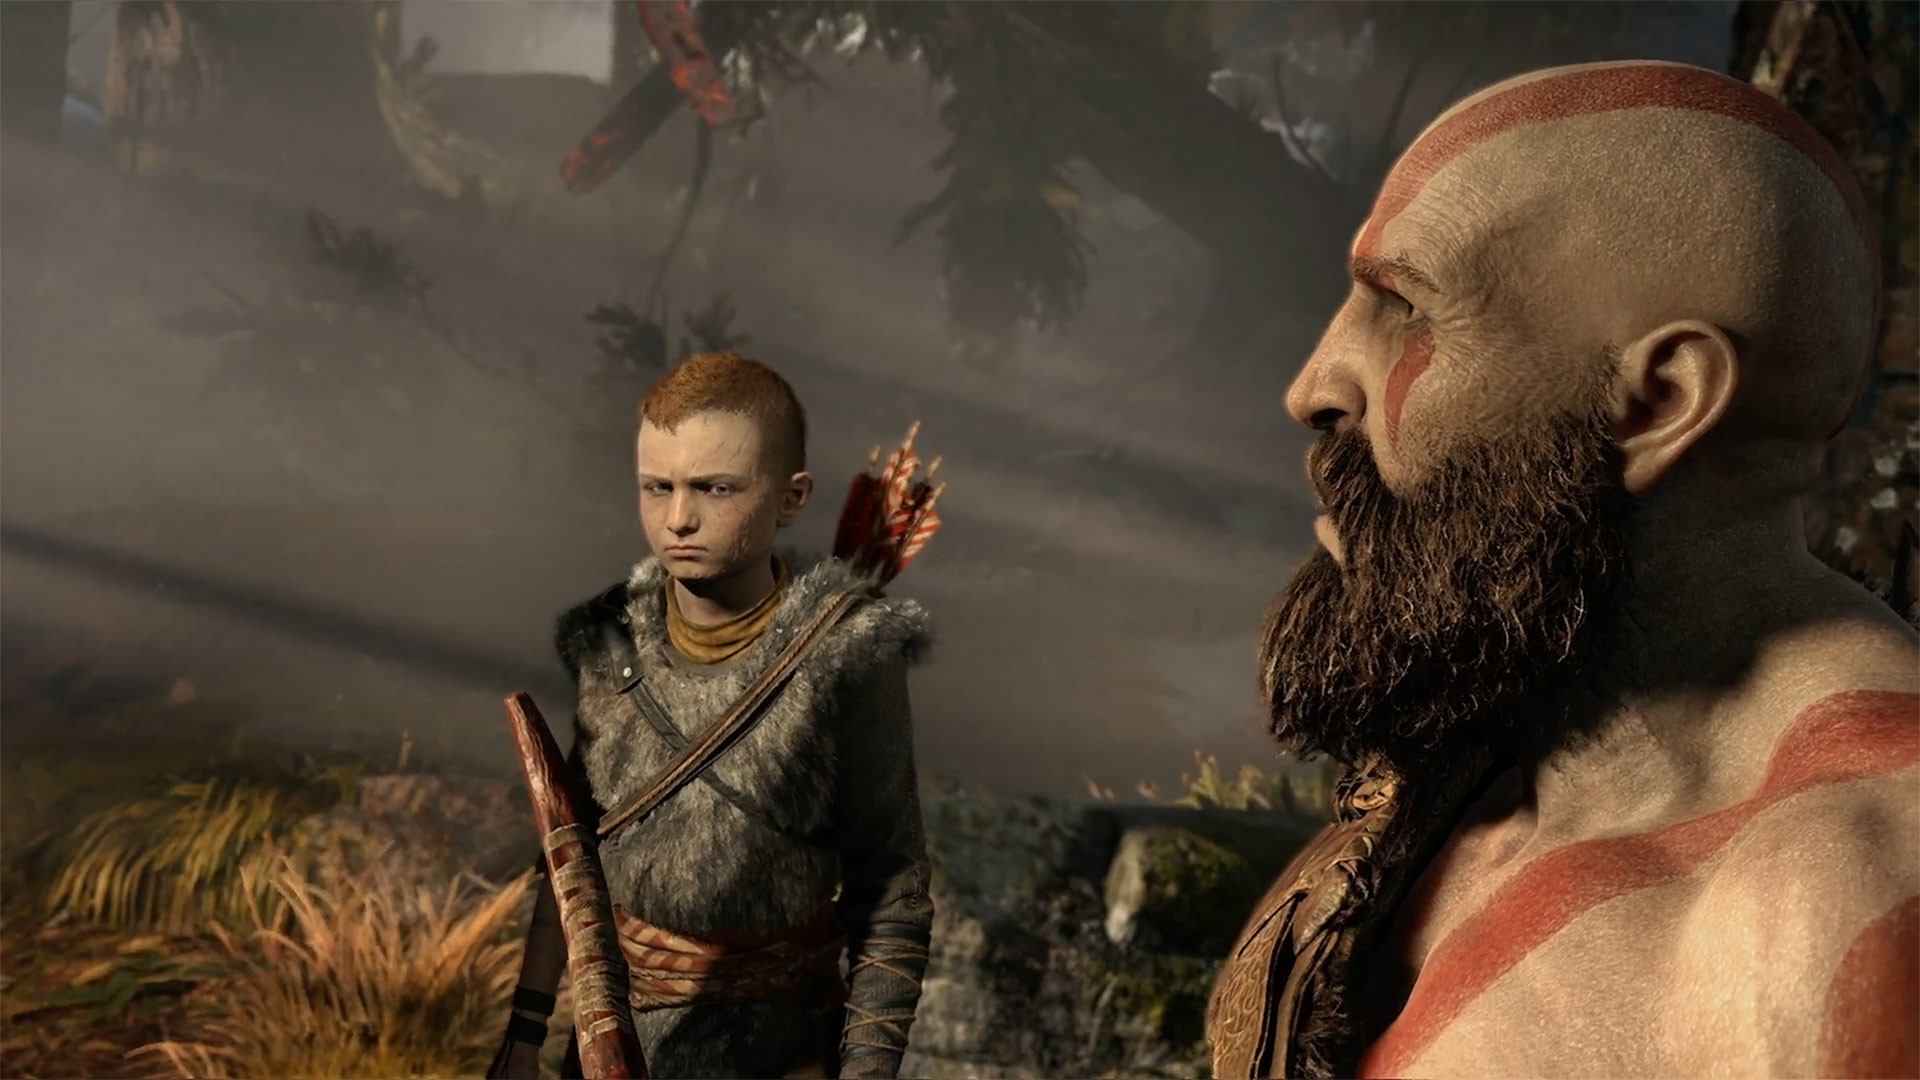 1920x1080 God Of War 4 Wallpapers 1080p by Lisa Sherrill #11